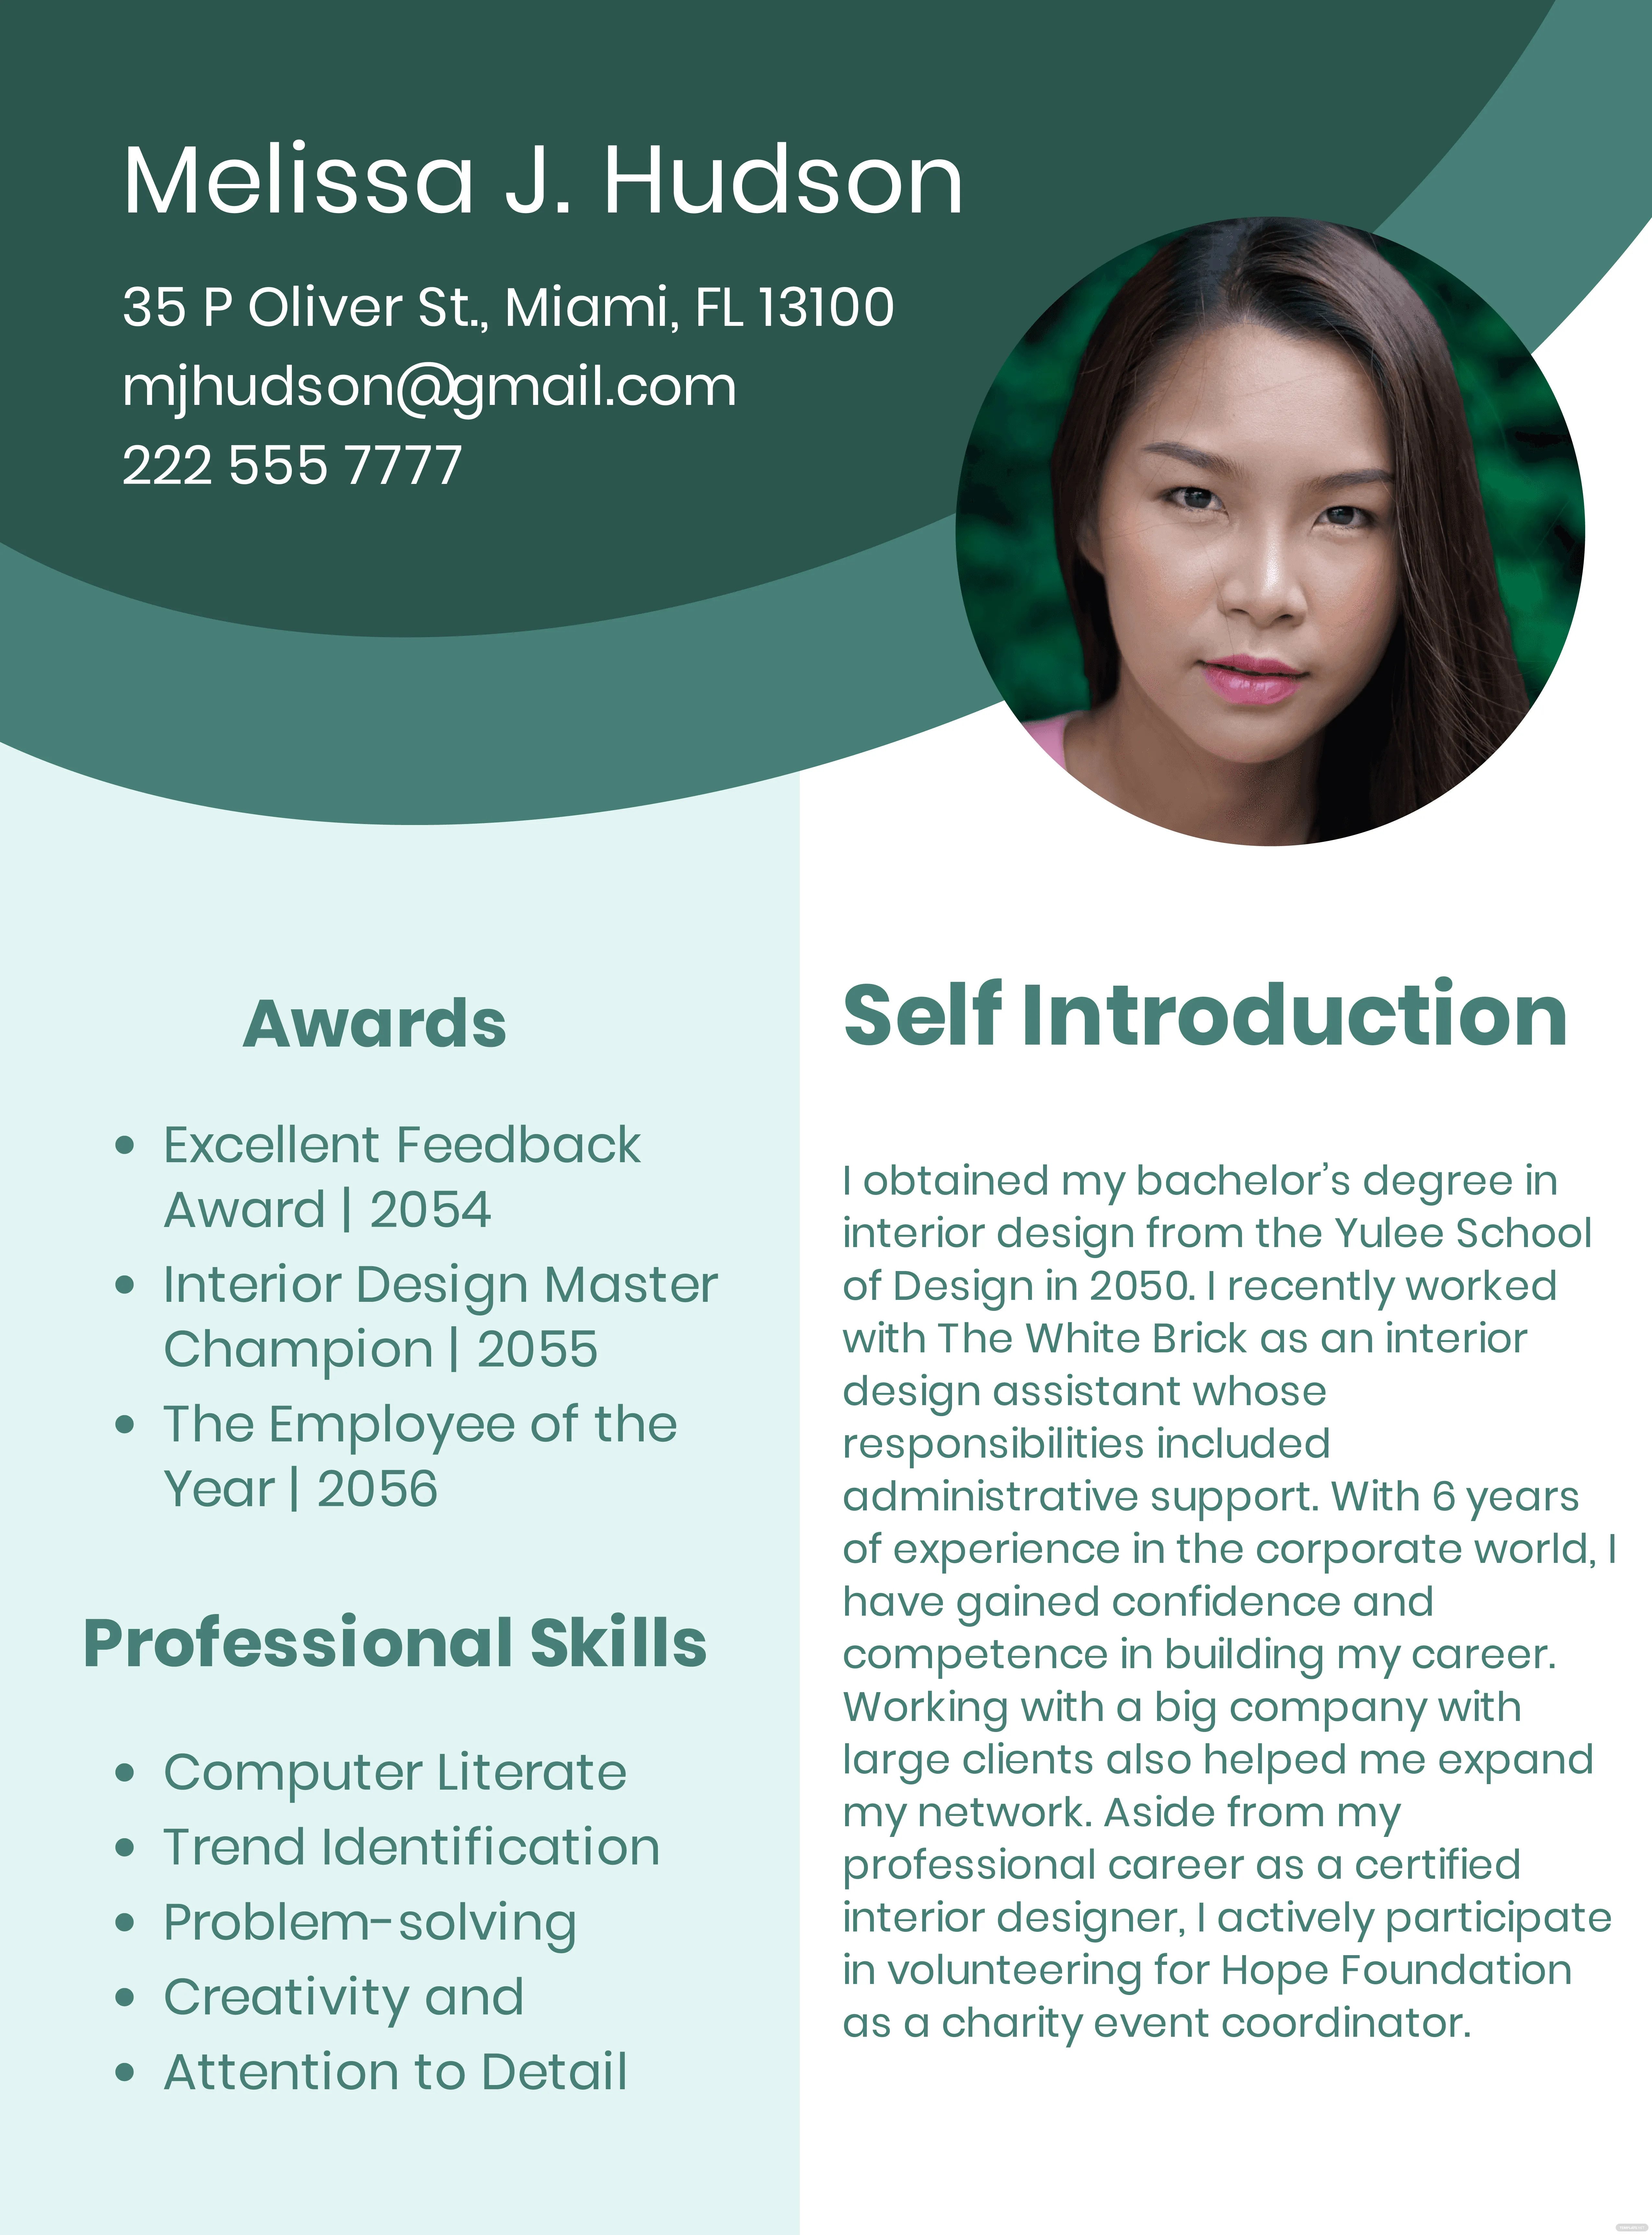 professional self introduction ideas and examples